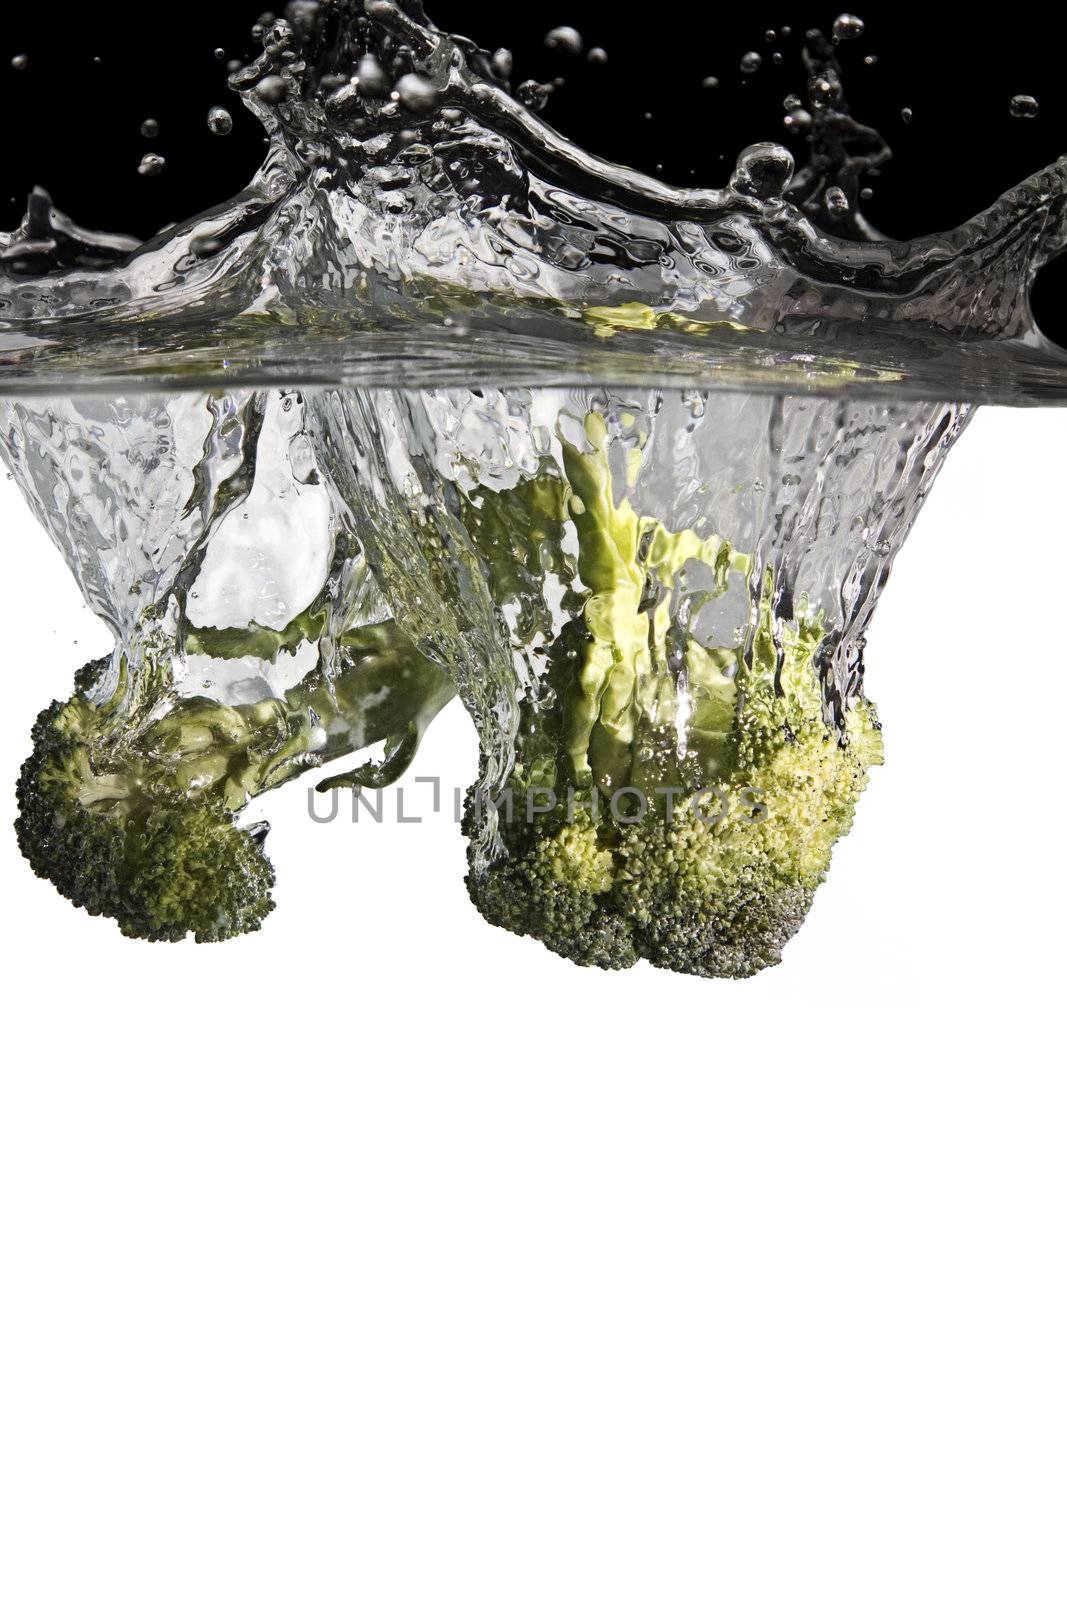 some broccoli in water with black and white background